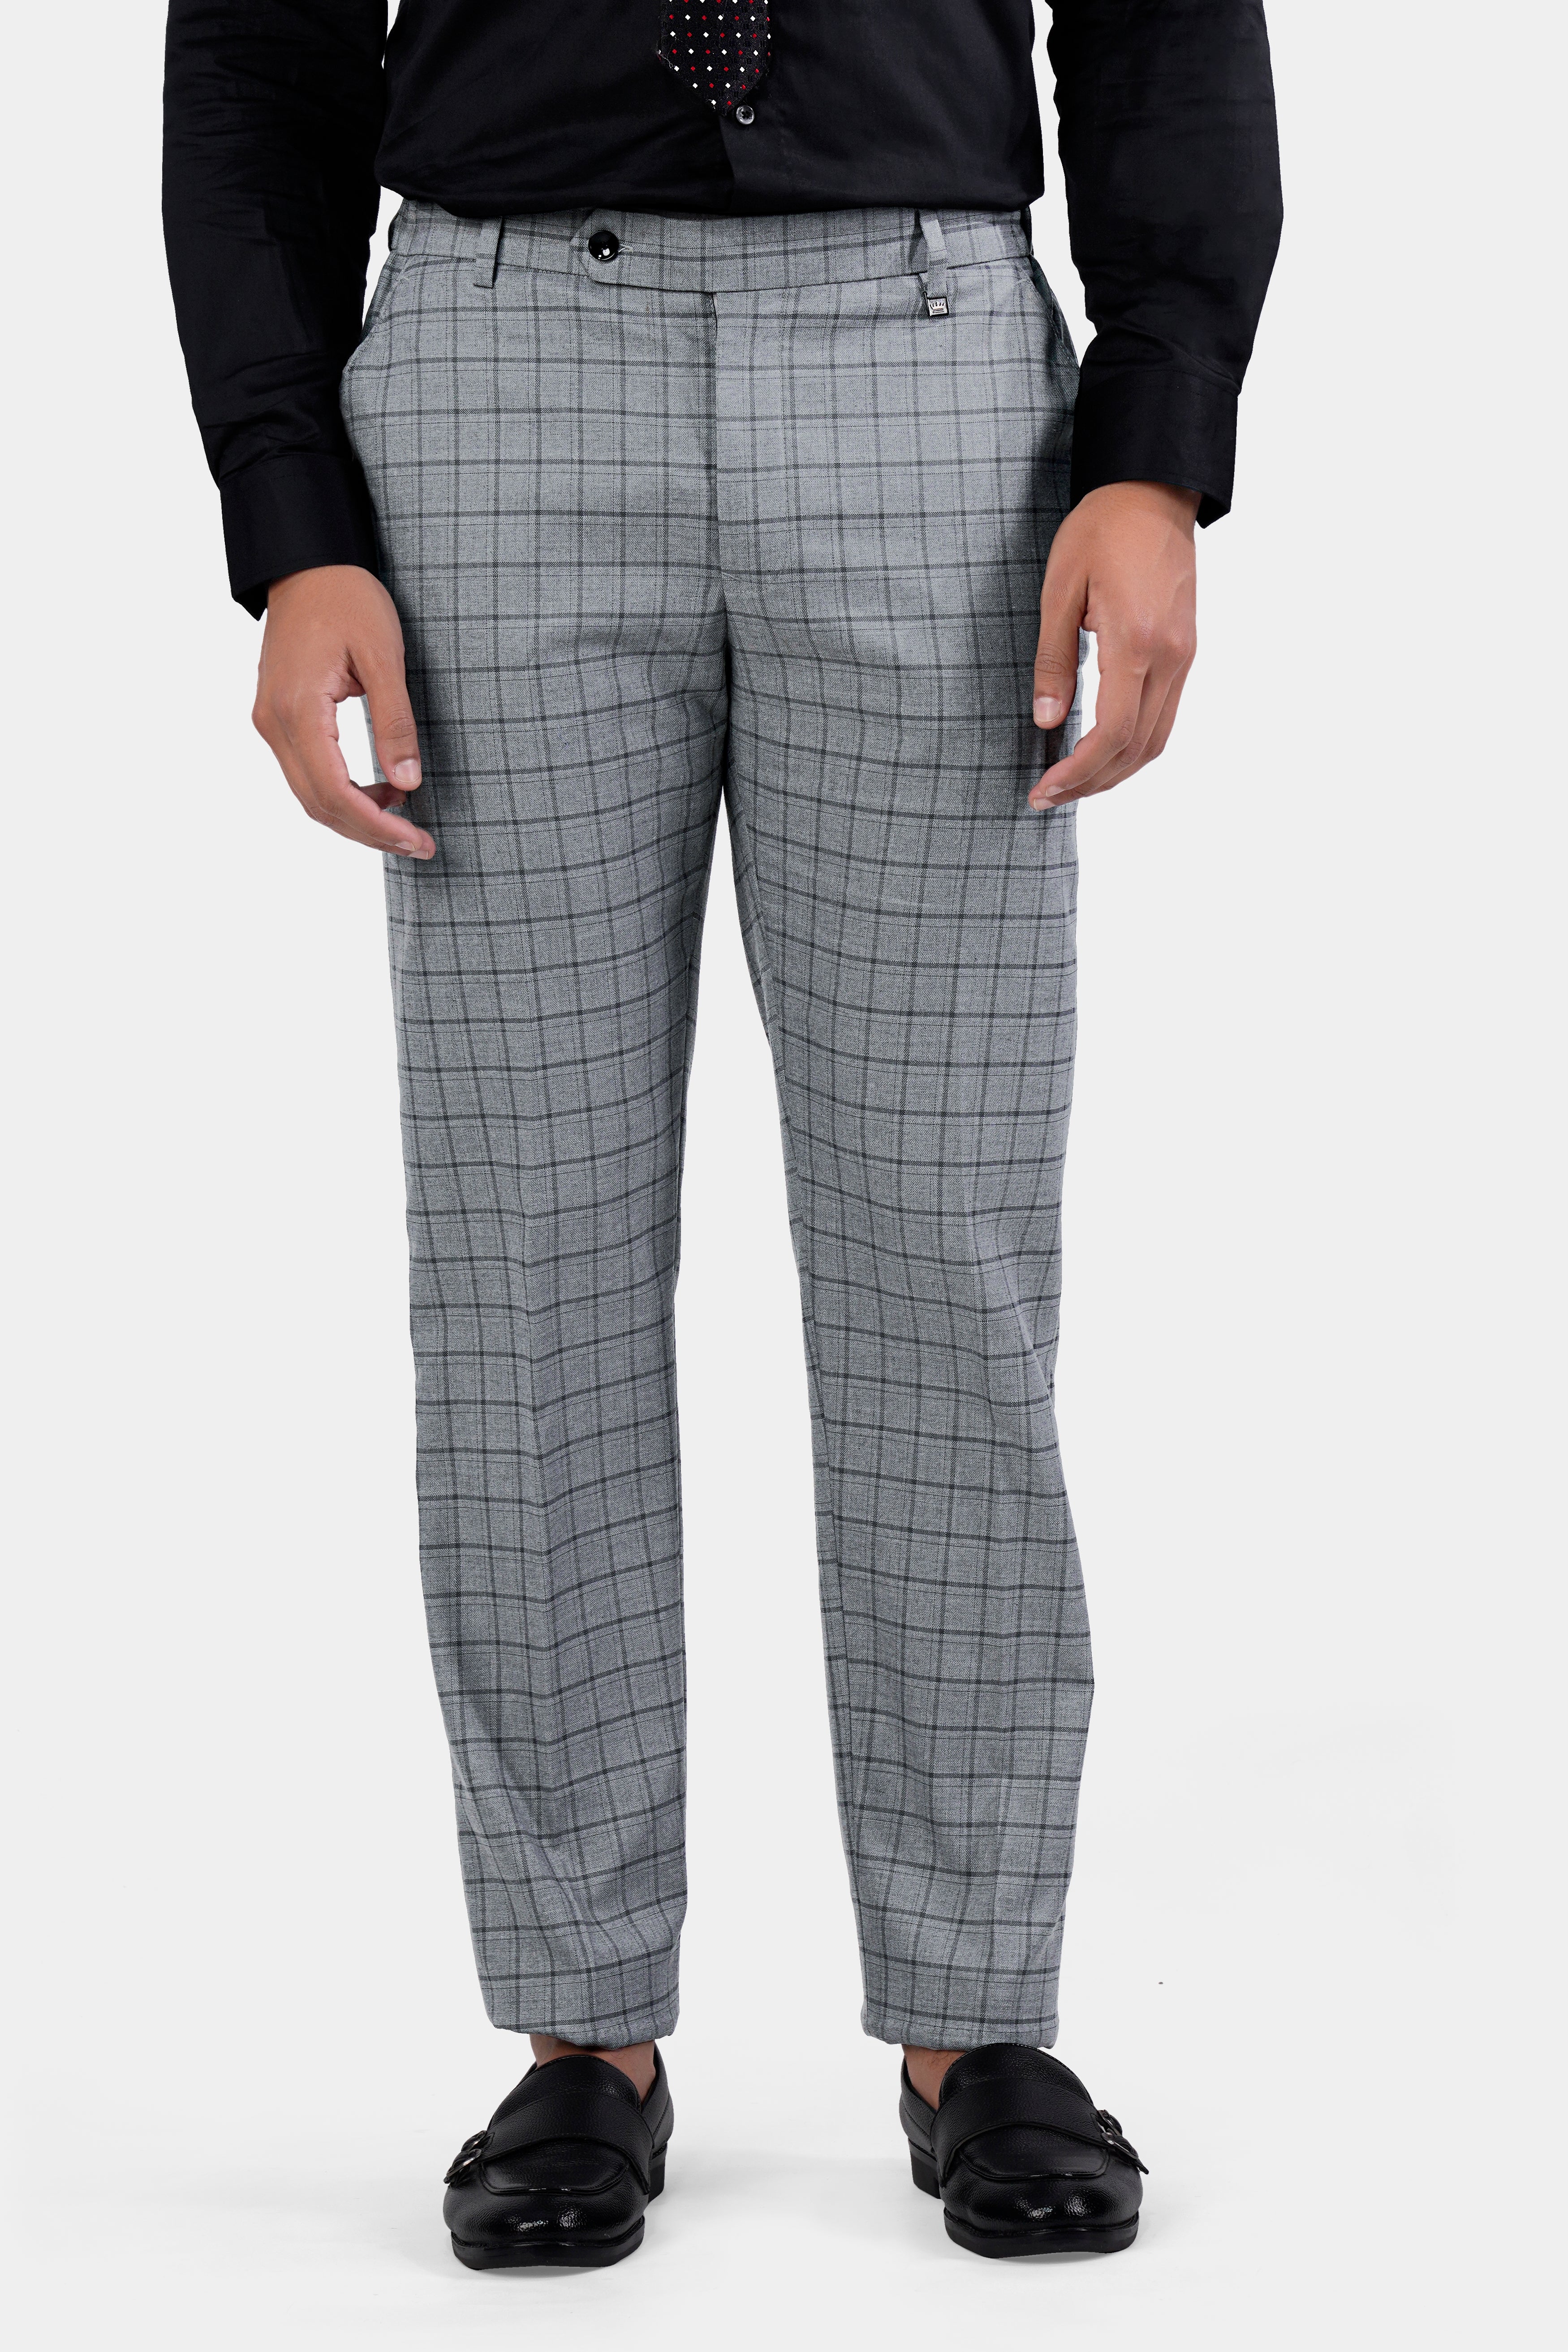 Boulder Gray Checkered Wool Rich Pant T2930-SW-28, T2930-SW-30, T2930-SW-32, T2930-SW-34, T2930-SW-36, T2930-SW-38, T2930-SW-40, T2930-SW-42, T2930-SW-44